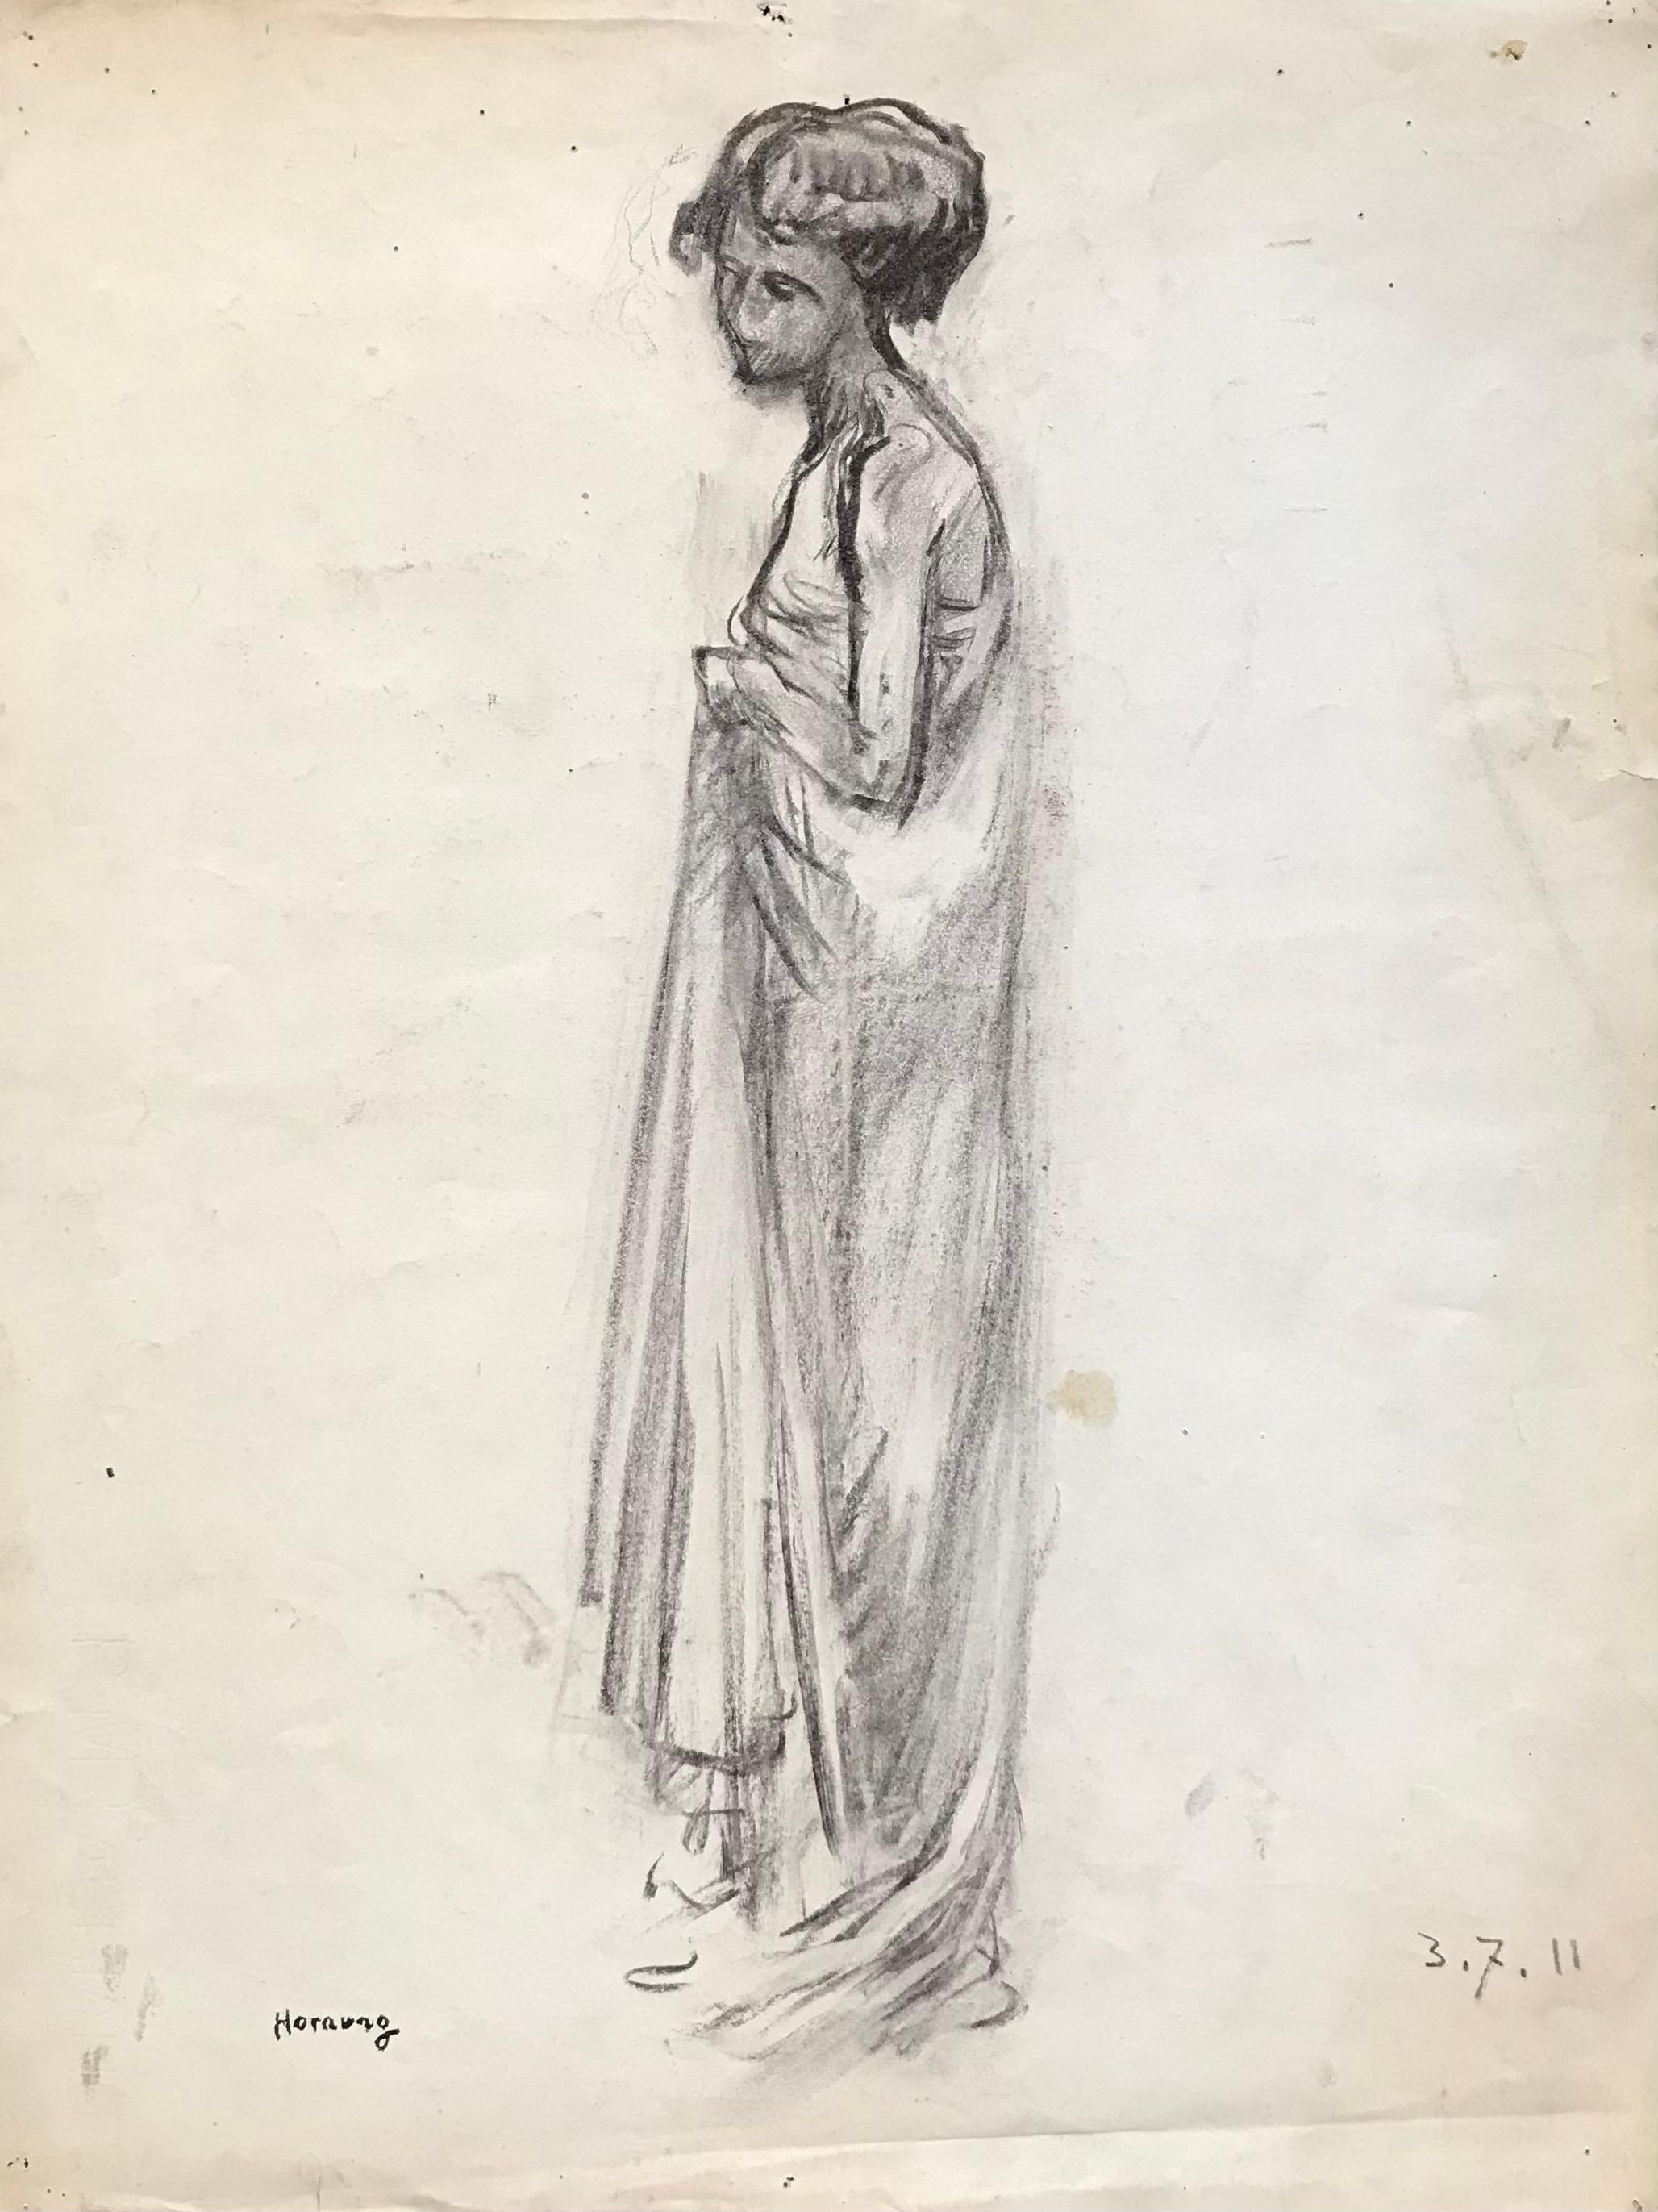 "Young woman in evening dress" by Emile Hornung - Drawing 43x57 cm